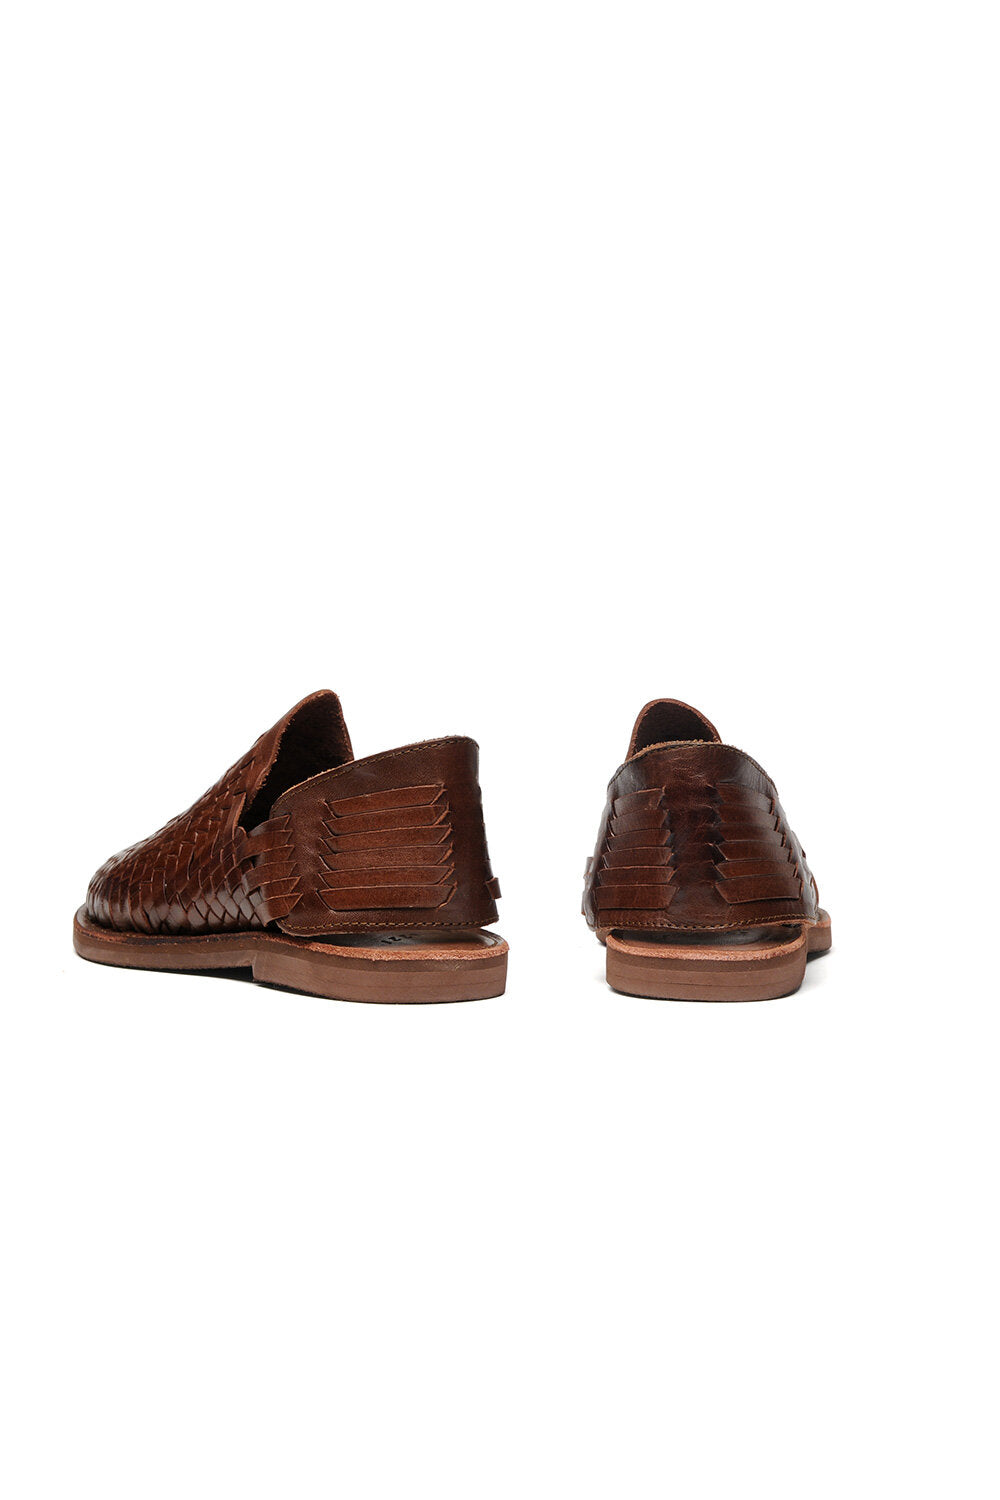 Rio Grande Leather Huarache | Slip on Vegetable Tanned Sandals | Brown 2